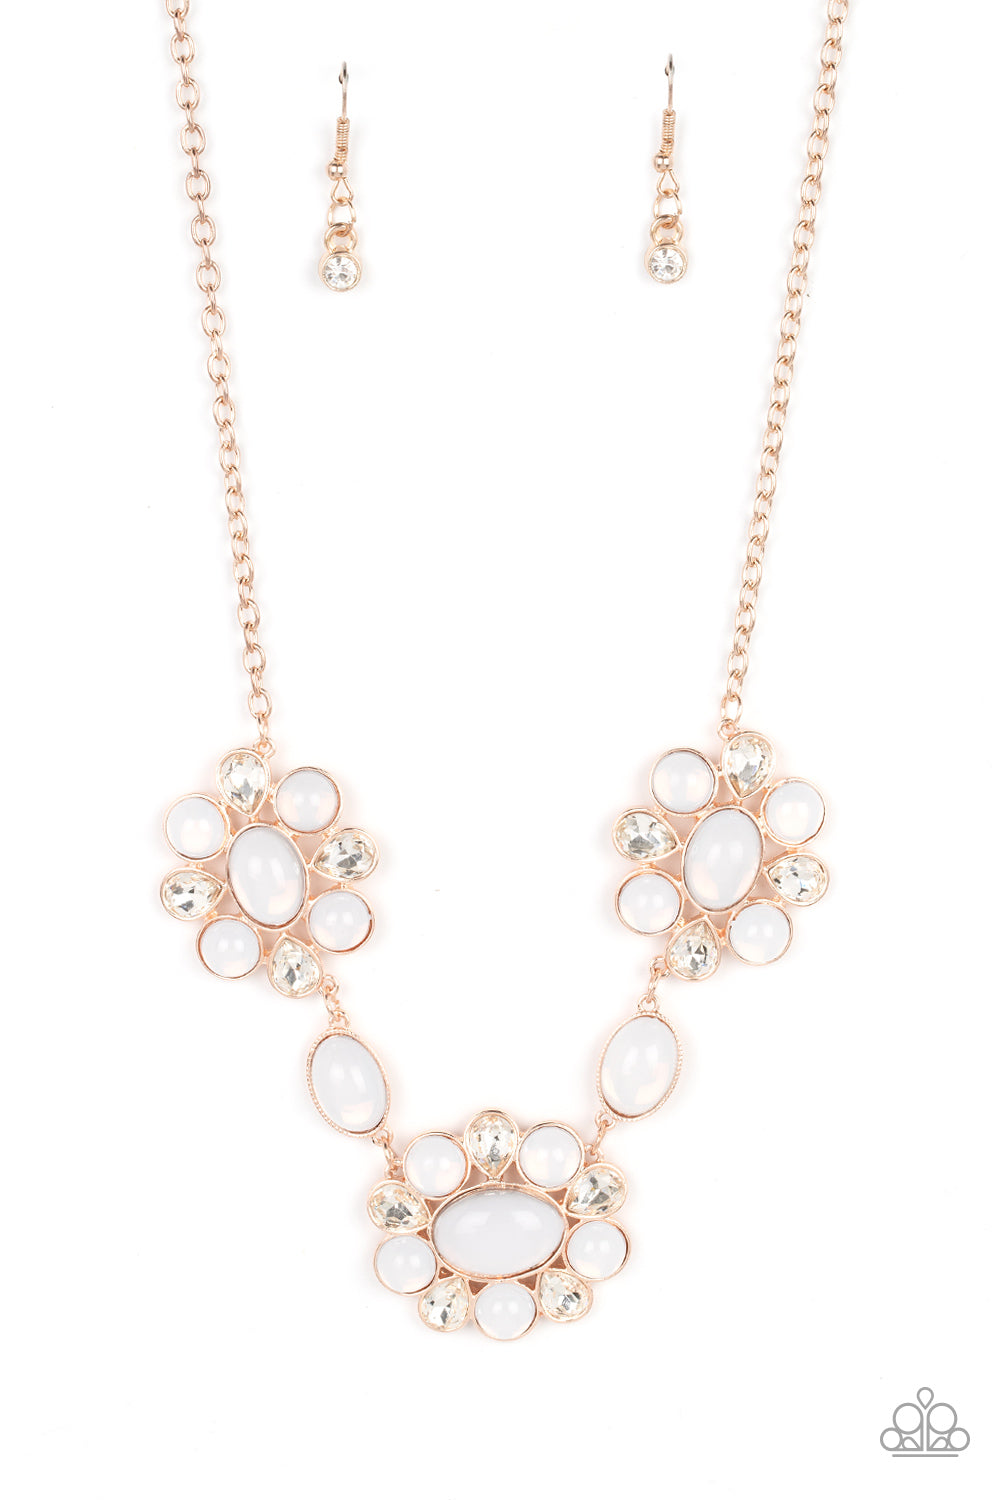 Paparazzi Your Chariot Awaits - Rose Gold Necklace